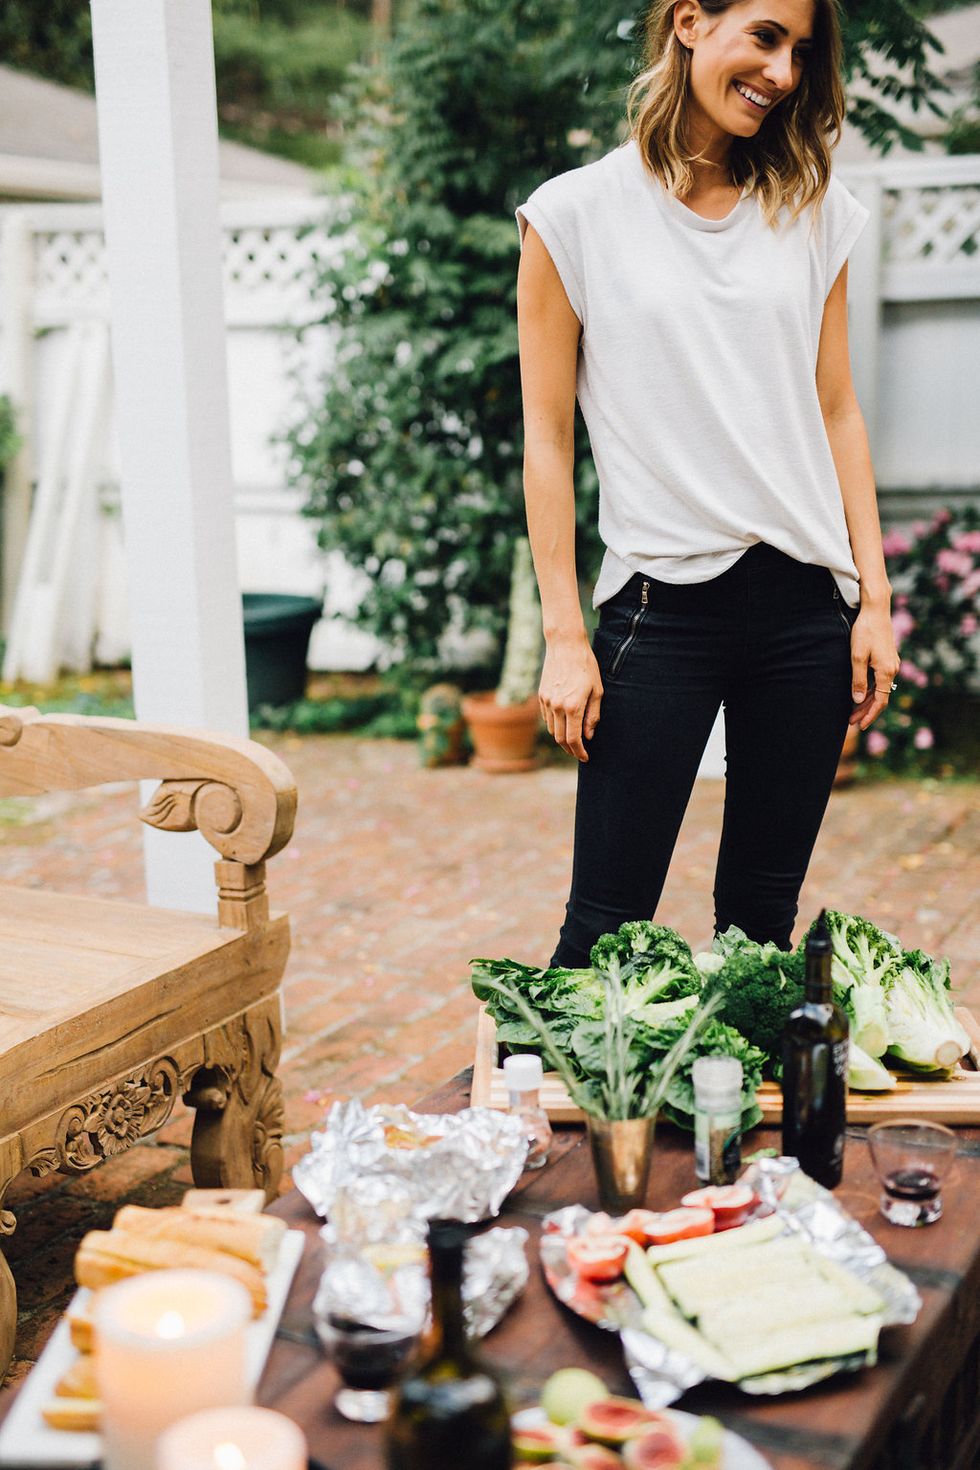 55+ Best Garden Party Ideas You Can Make at Home 